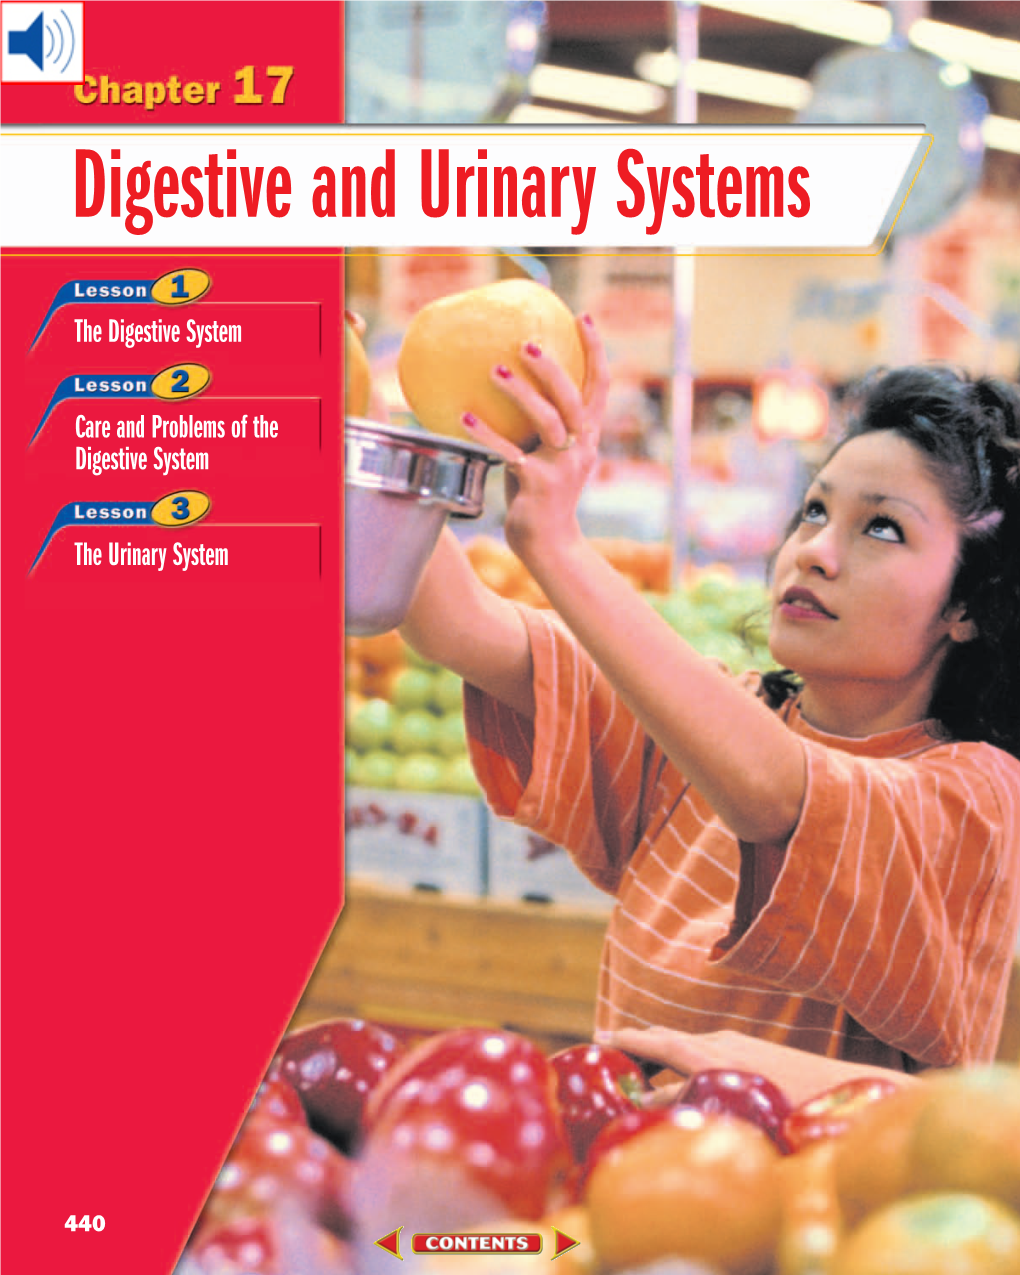 Chapter 17: Digestive and Urinary Systems